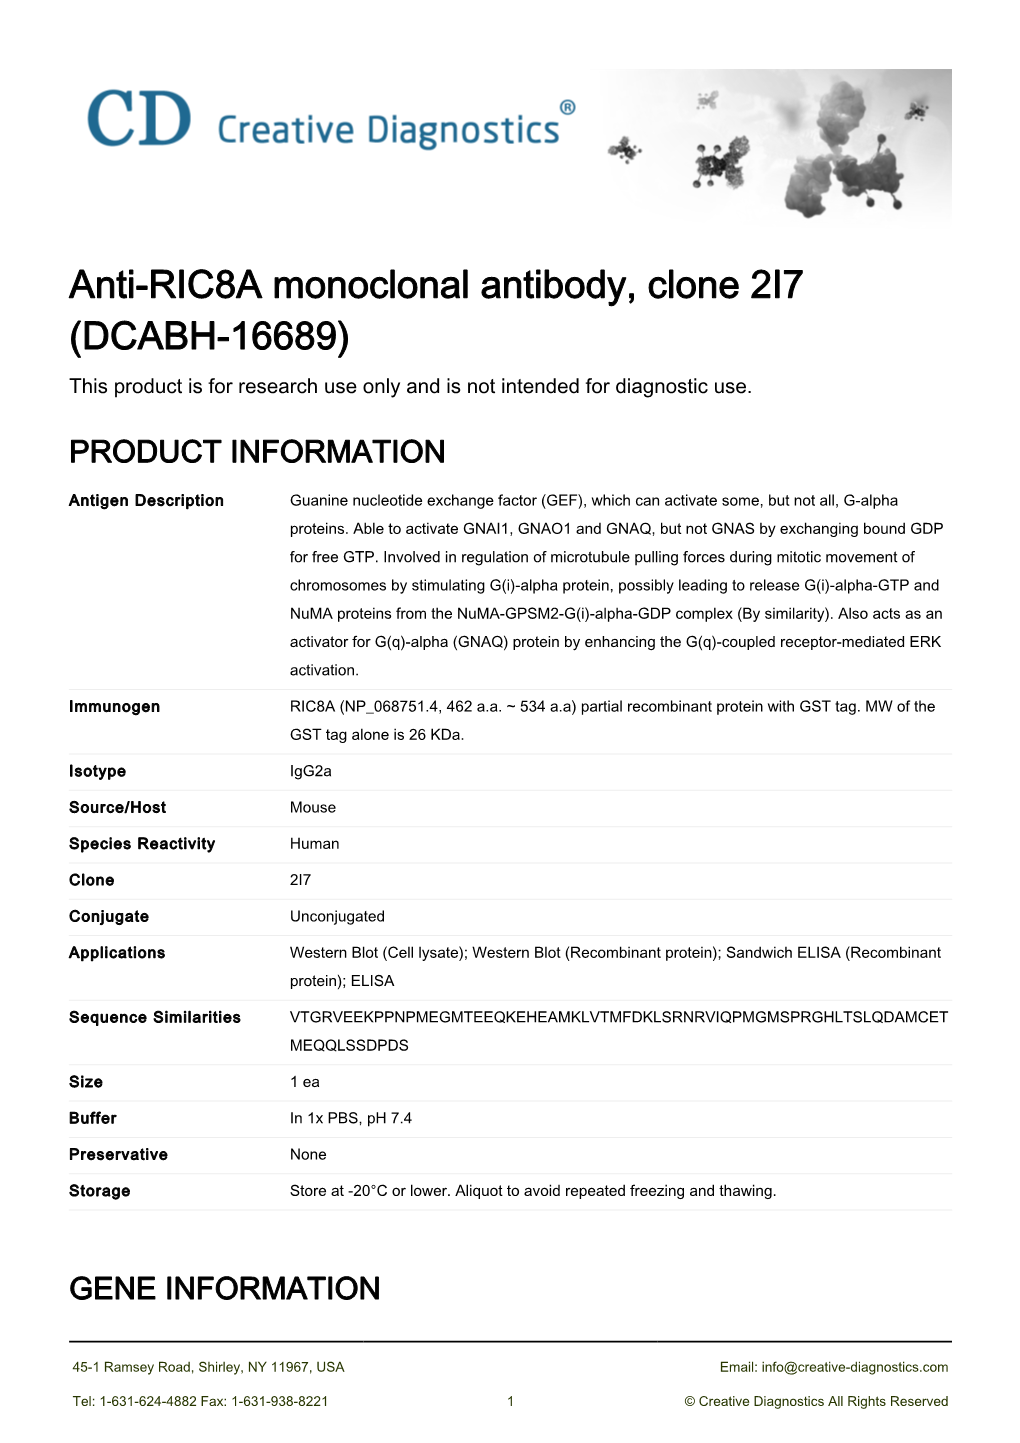 Anti-RIC8A Monoclonal Antibody, Clone 2I7 (DCABH-16689) This Product Is for Research Use Only and Is Not Intended for Diagnostic Use